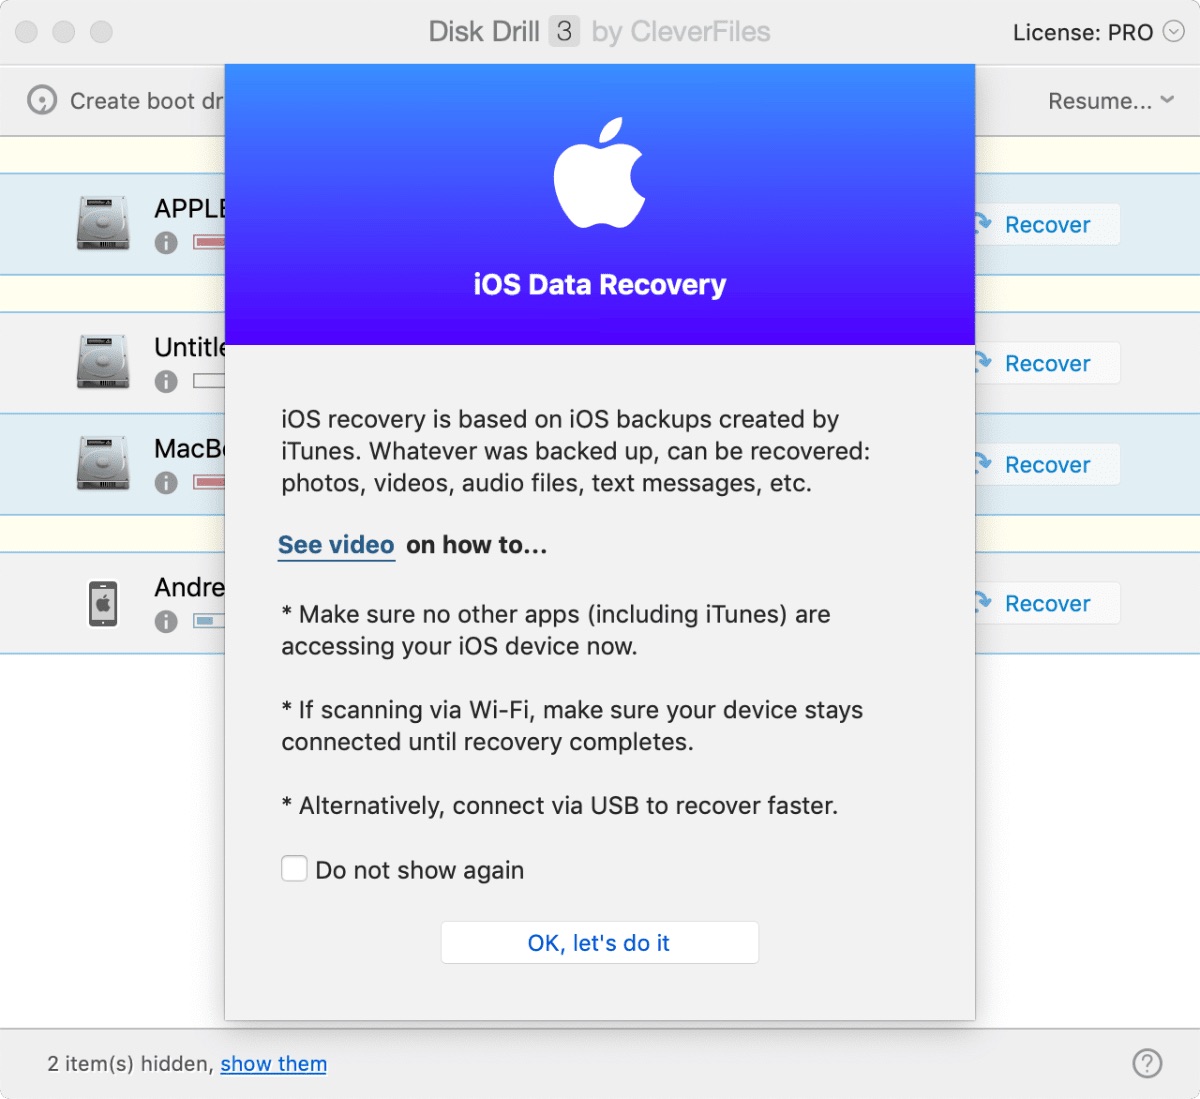 disk drill for mac 10.5.8